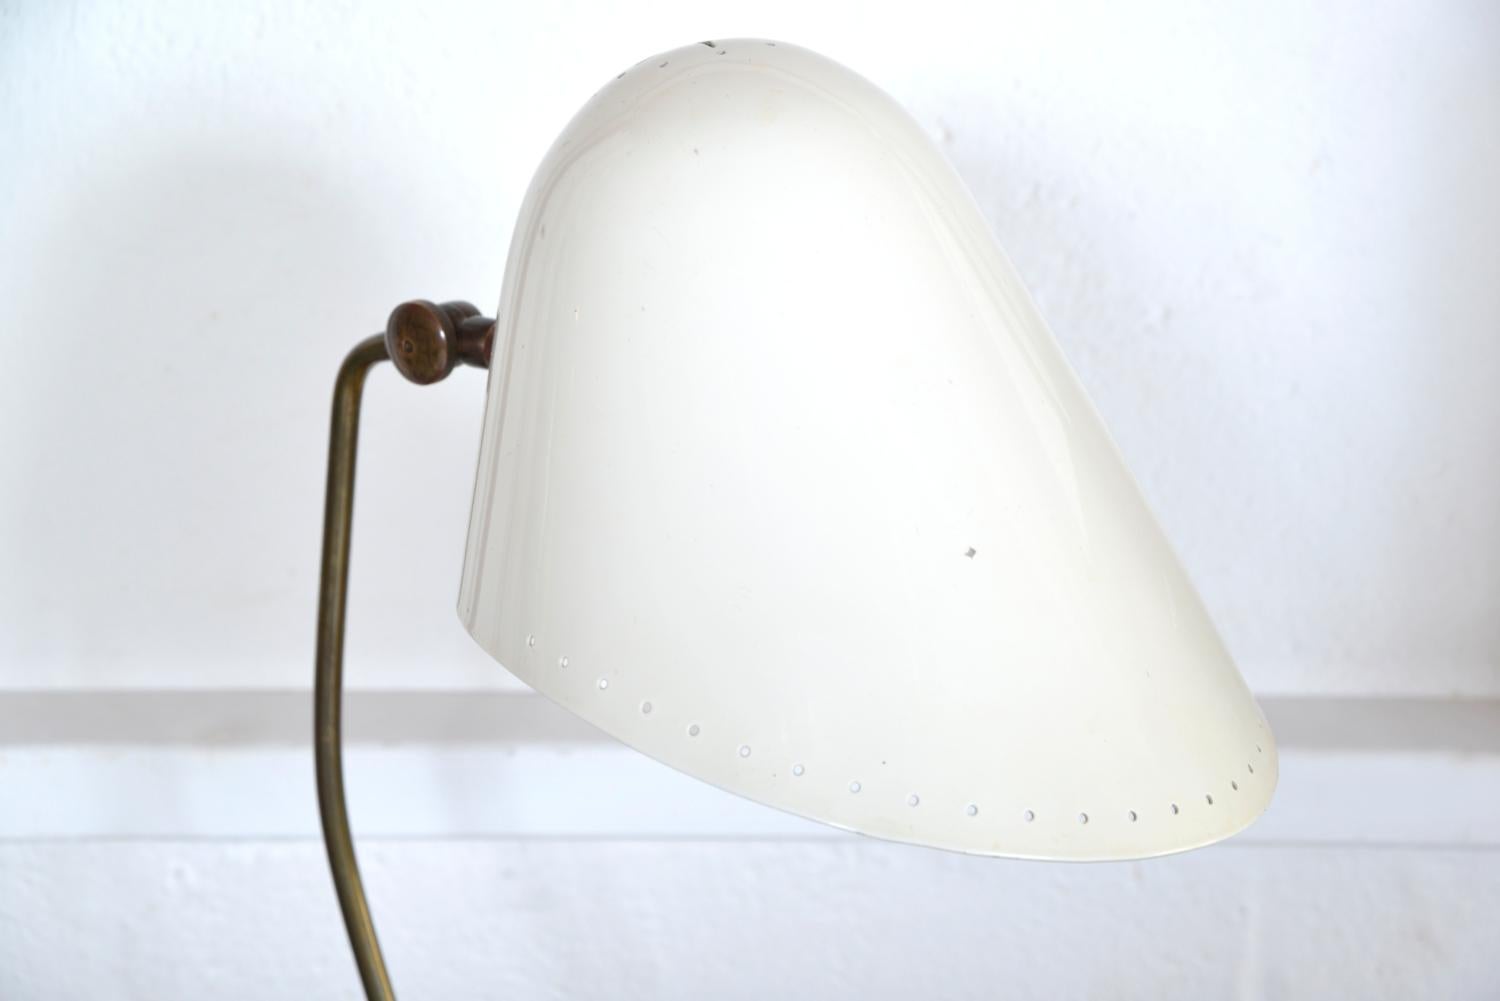 Midcentury Versalite Desk Lamp by A B Read for Troughton & Young Postwar British 1